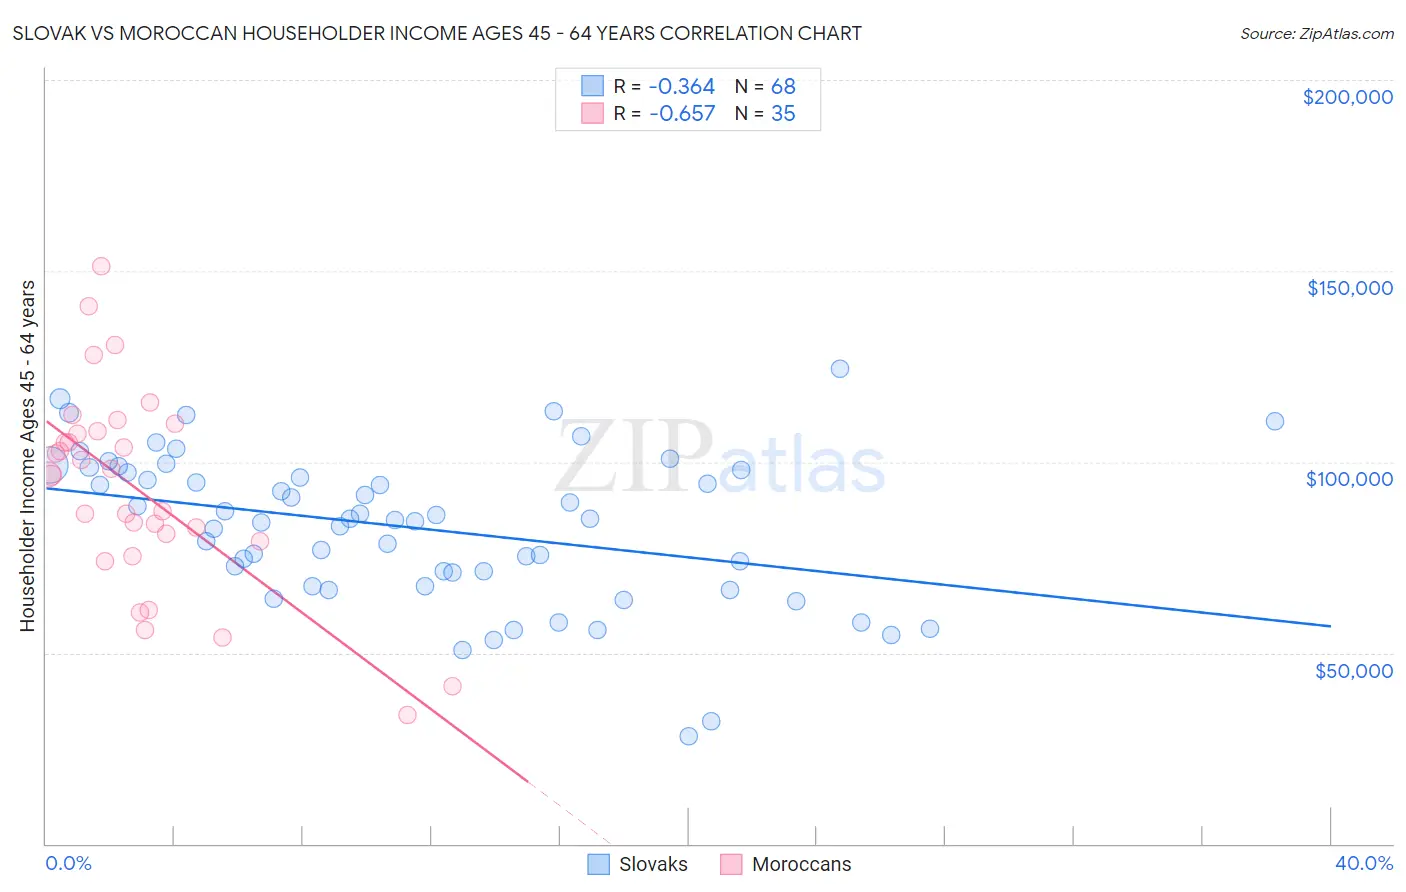 Slovak vs Moroccan Householder Income Ages 45 - 64 years